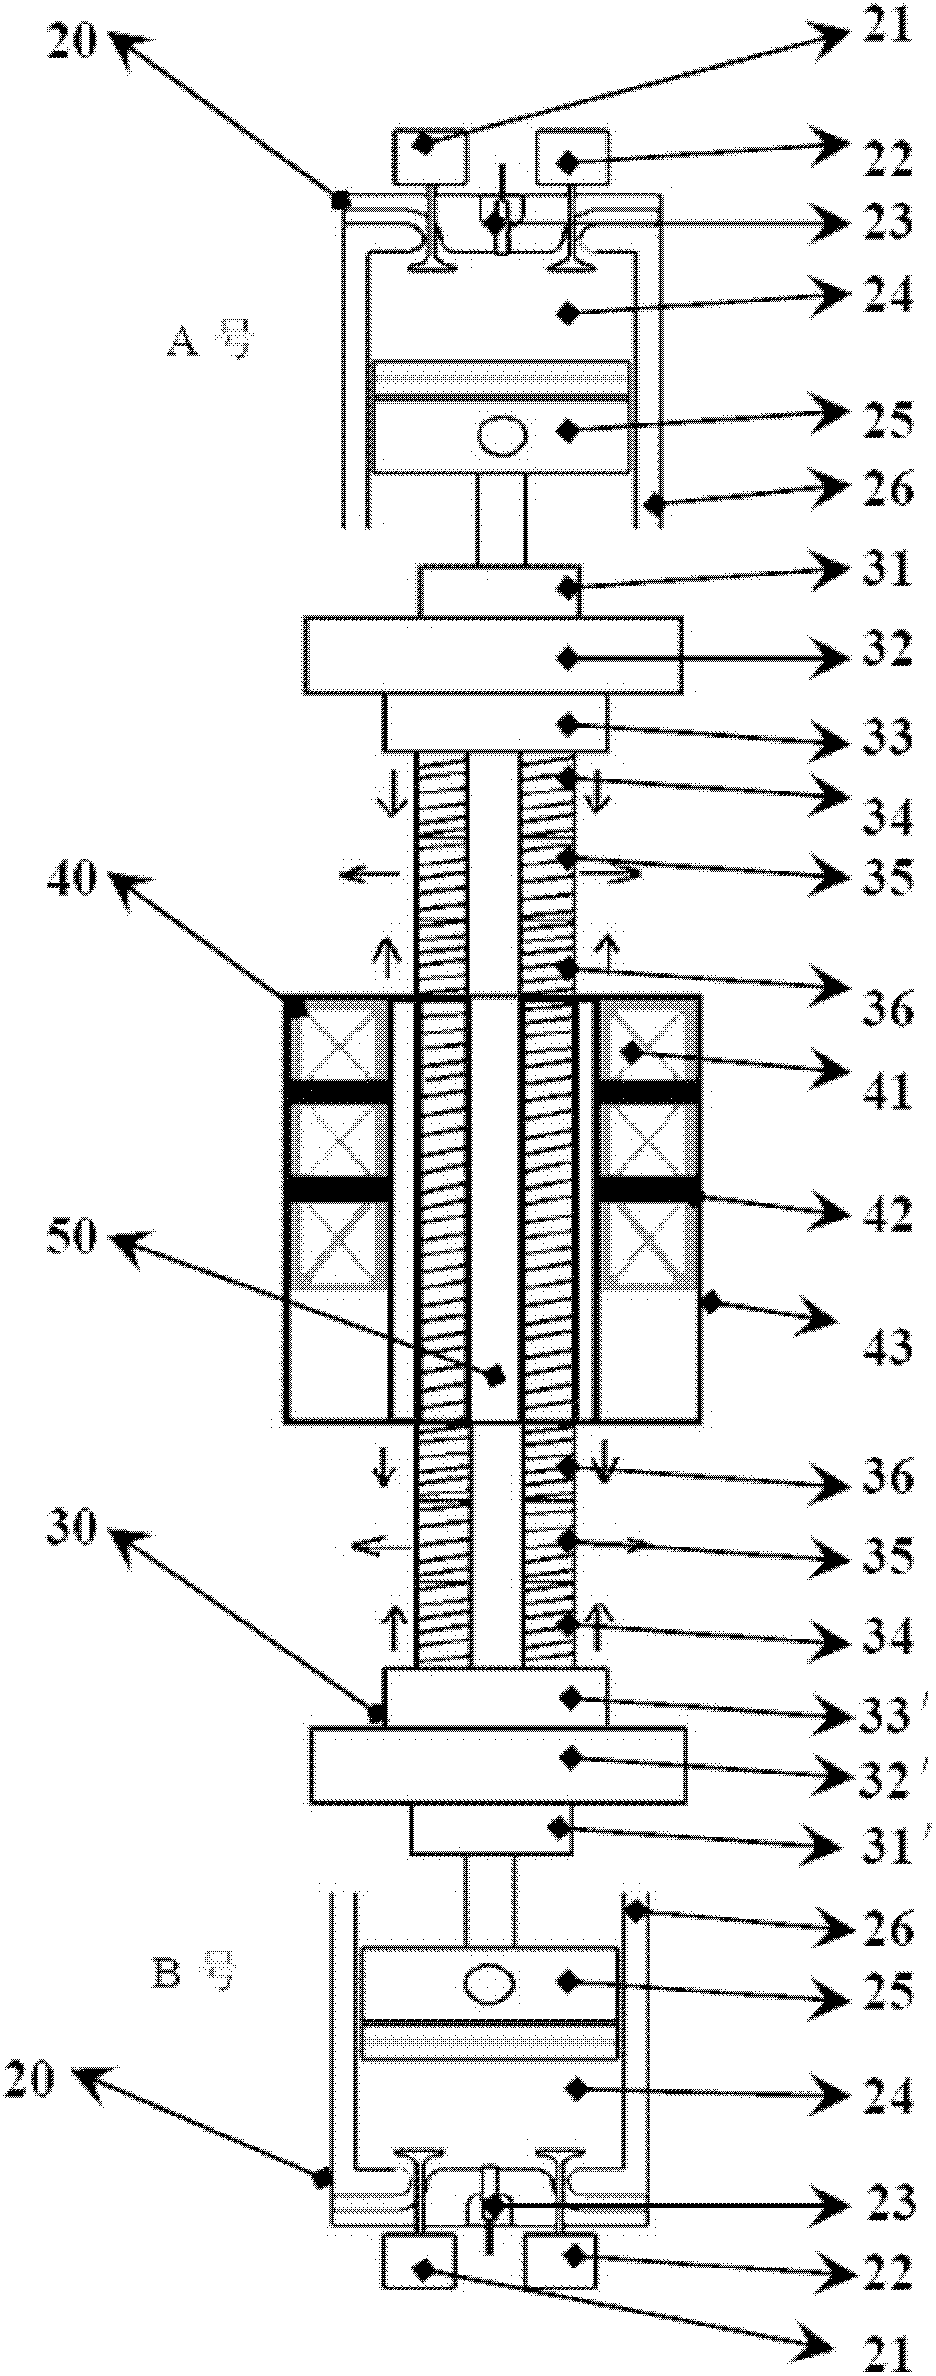 Internal-combustion permanent-magnet linear power generation device